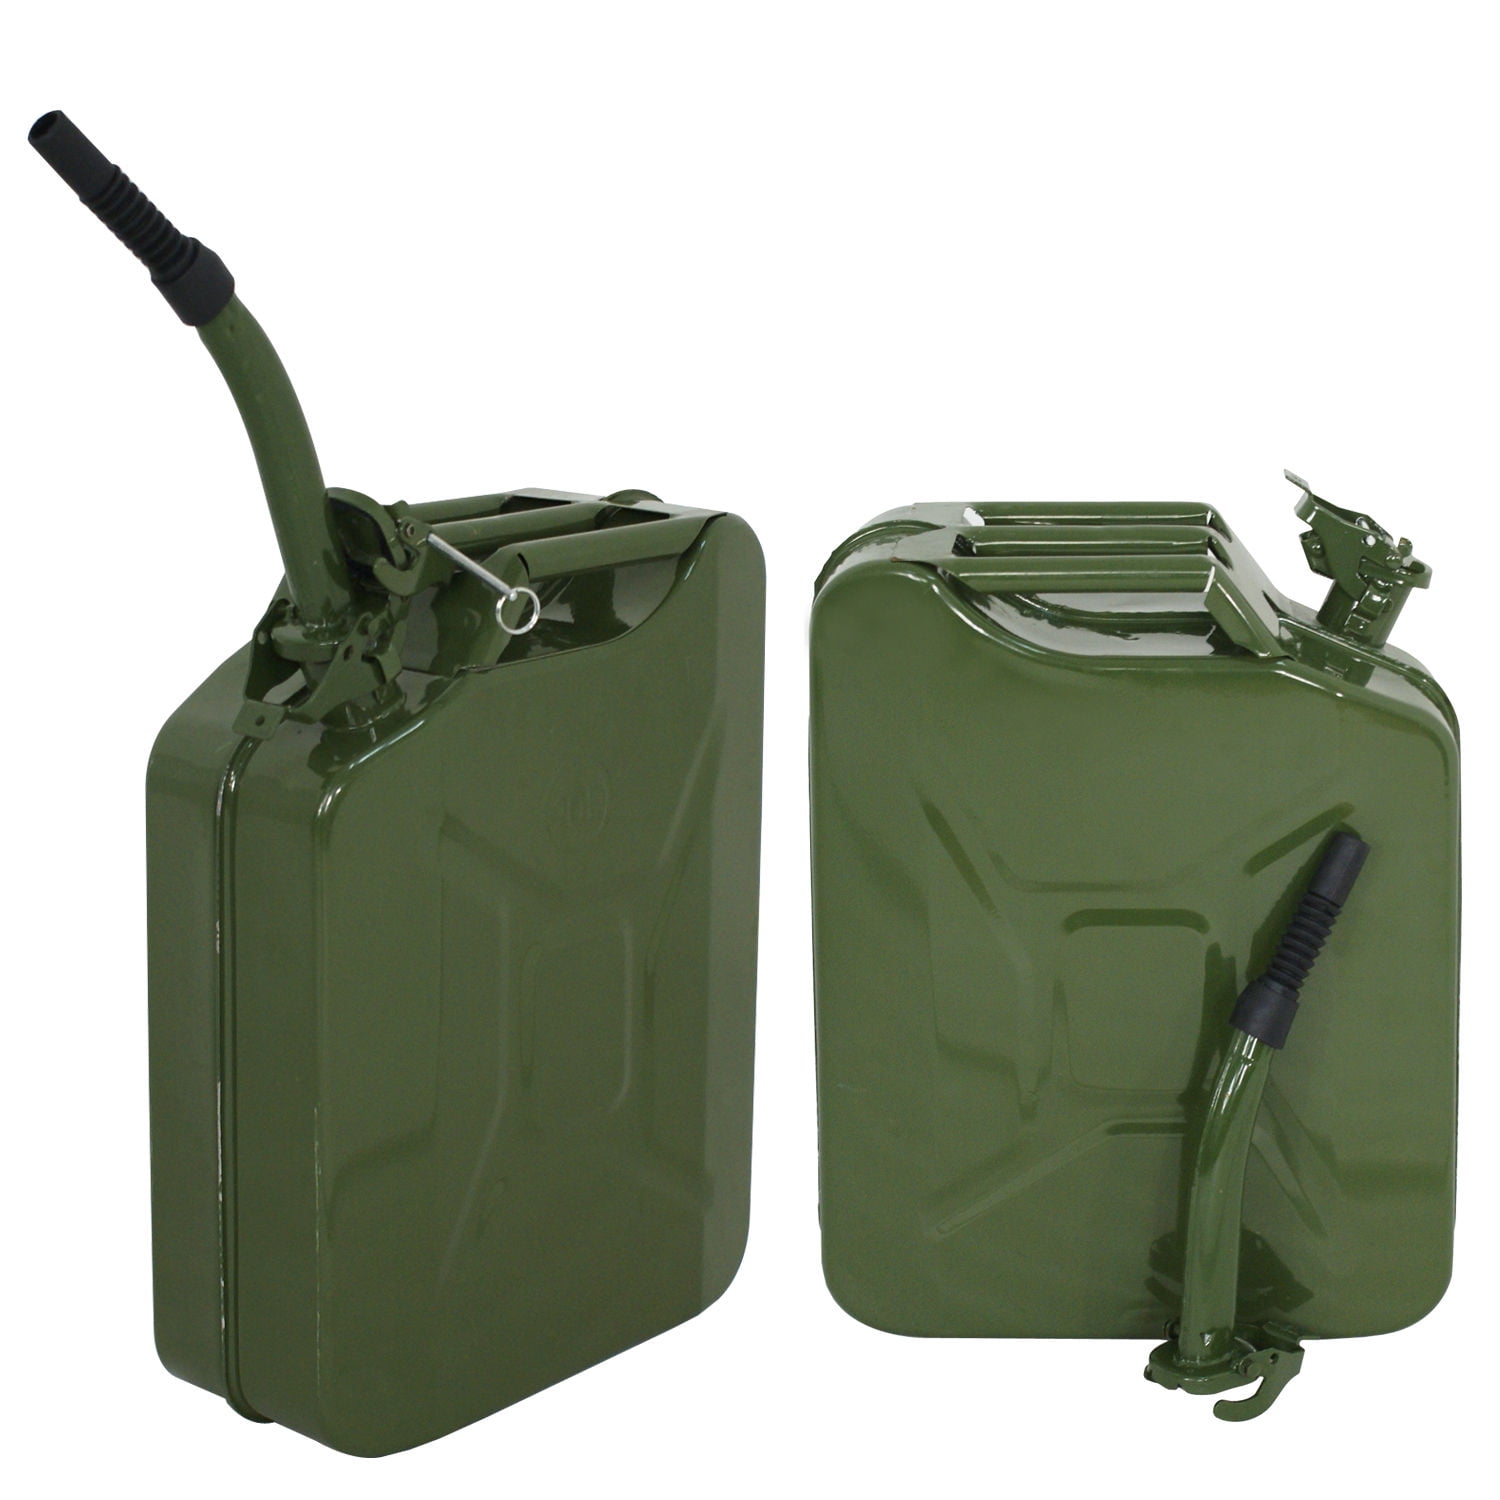 5x Jerry Can Fuel Tank w/ Holder Steel 5Gallon 20L Nato Style Military Green 